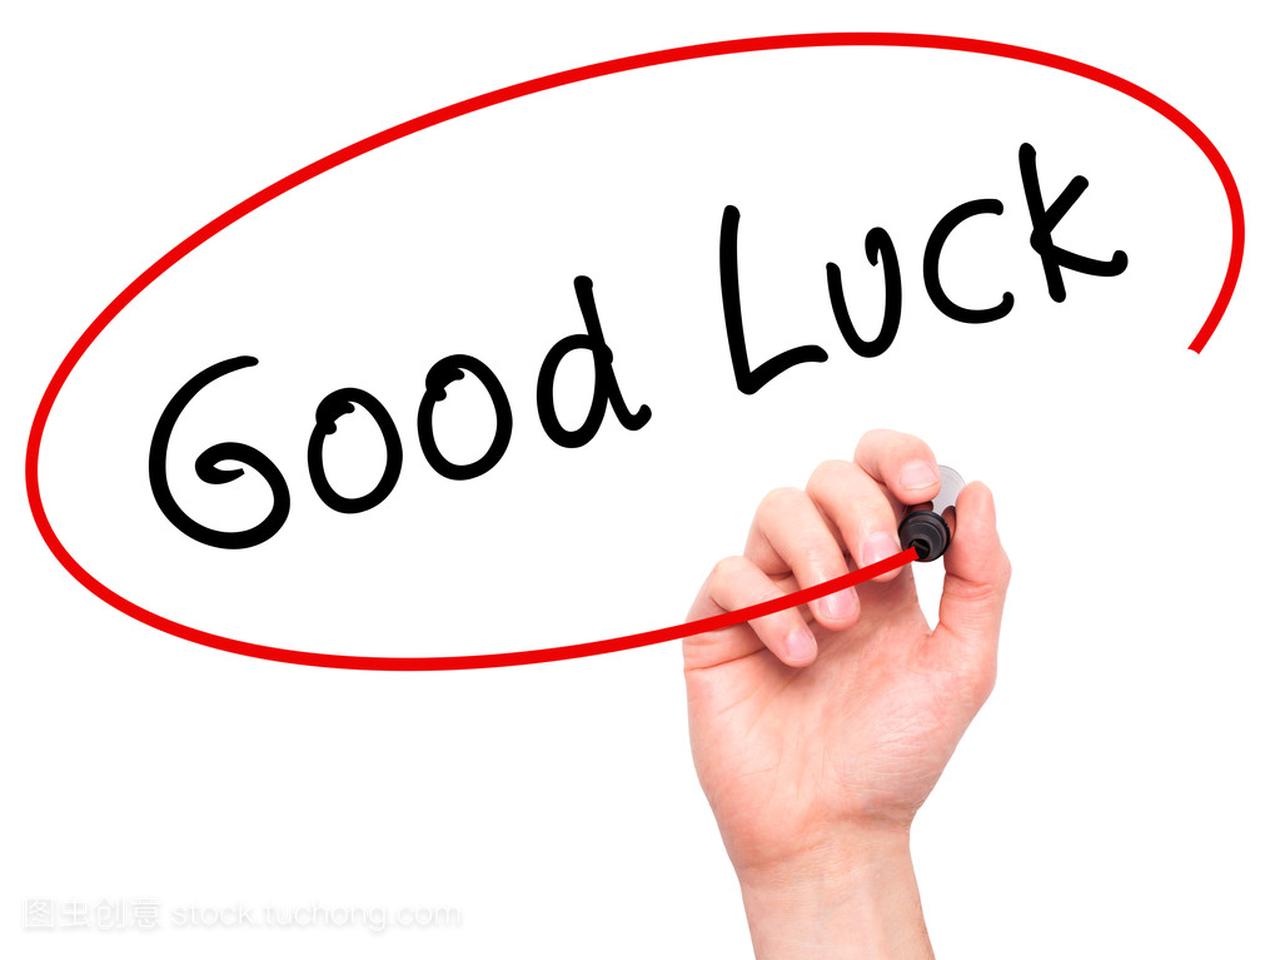 Man Hand writing Good Luck with marker on transparent wipe board